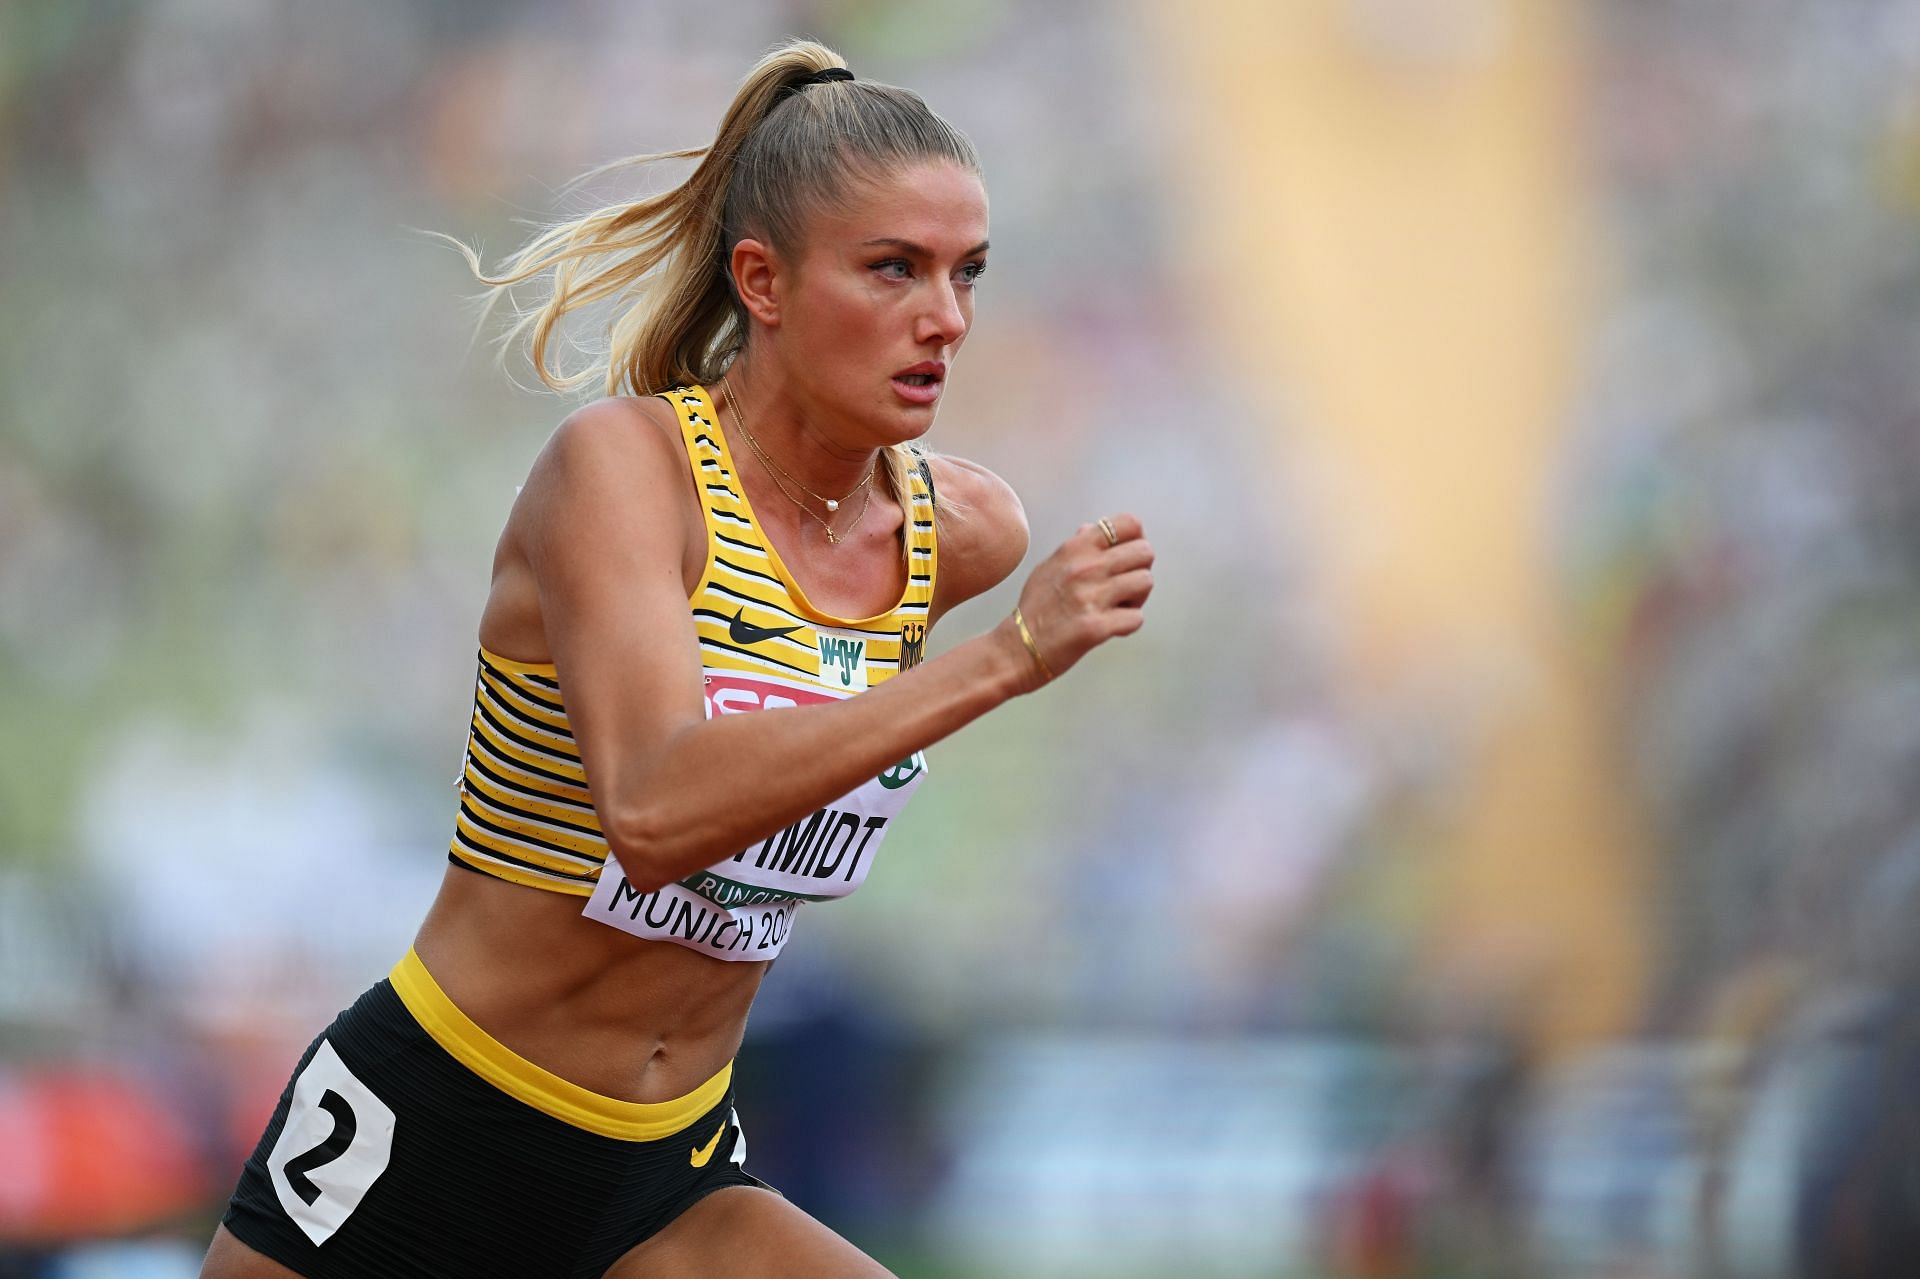 What happened when Alica Schmidt took on Mats Hummels in a 400m race?